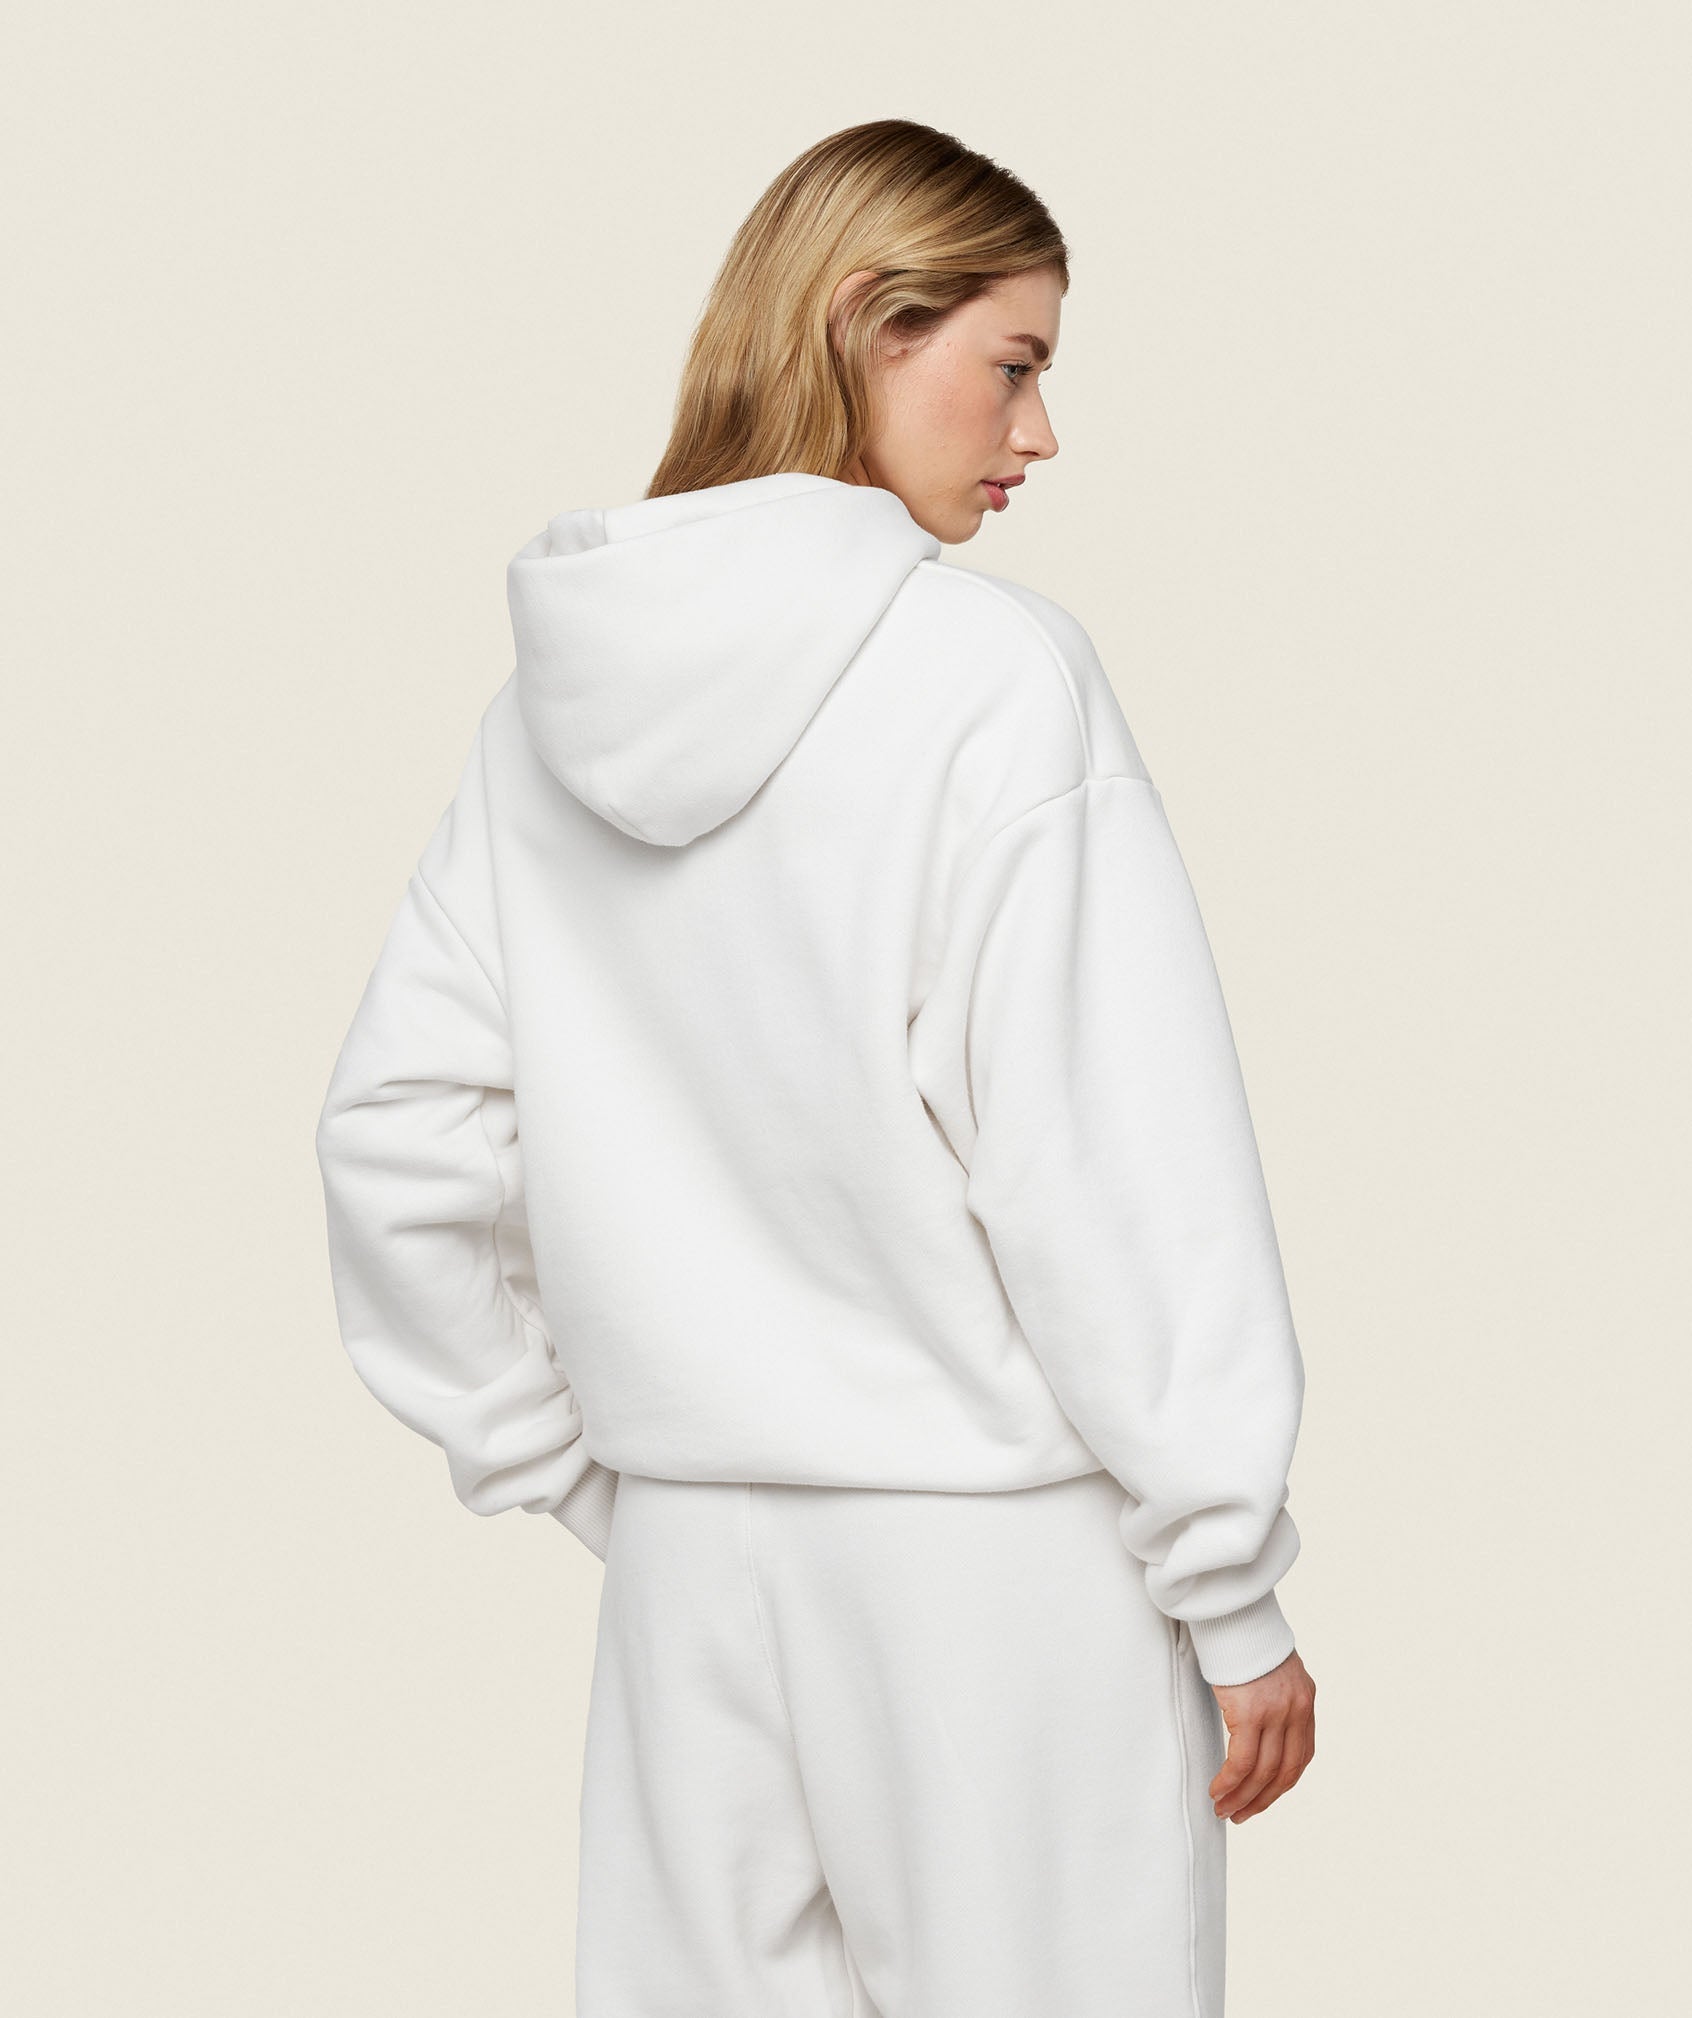 Phys Ed Graphic Hoodie in Ecru White - view 2